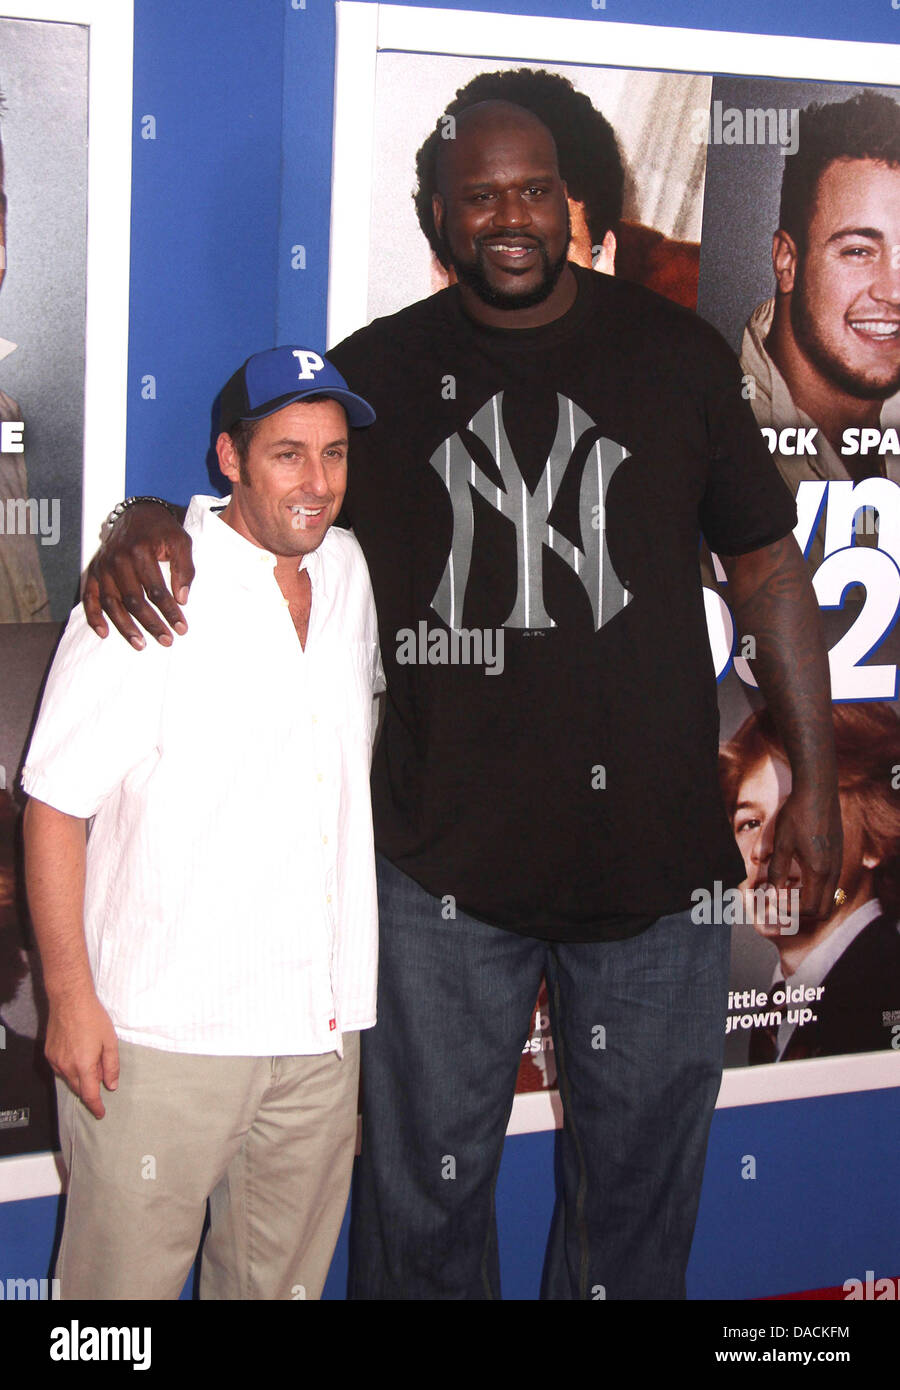 New York, New York, USA. 10th July, 2013. Actor ADAM SANDLER and former basketball player SHAQUILLE O'NEAL attend the New York premiere of 'Grown Ups 2' held at AMC Loews Lincoln Square. Credit:  Nancy Kaszerman/ZUMAPRESS.com/Alamy Live News Stock Photo